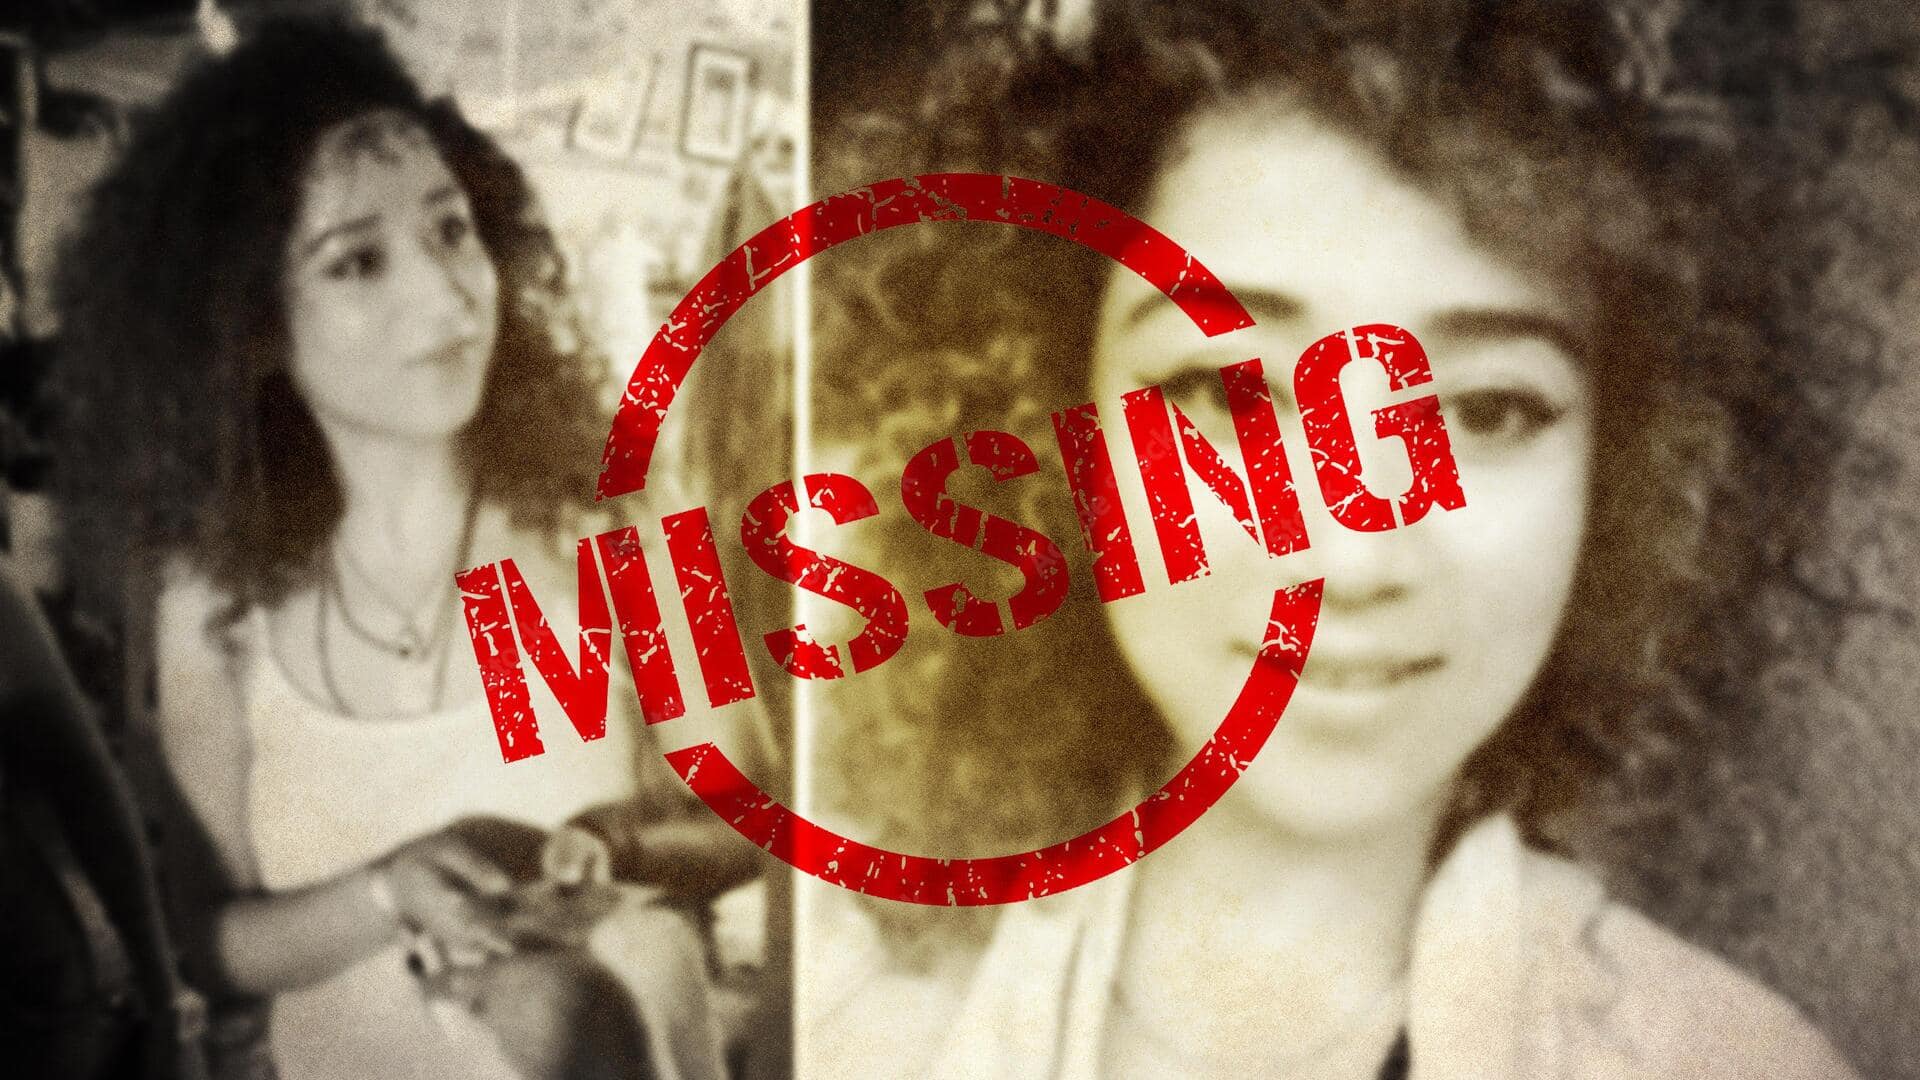 Goa: Nepal mayor's daughter goes missing, found 2 days later